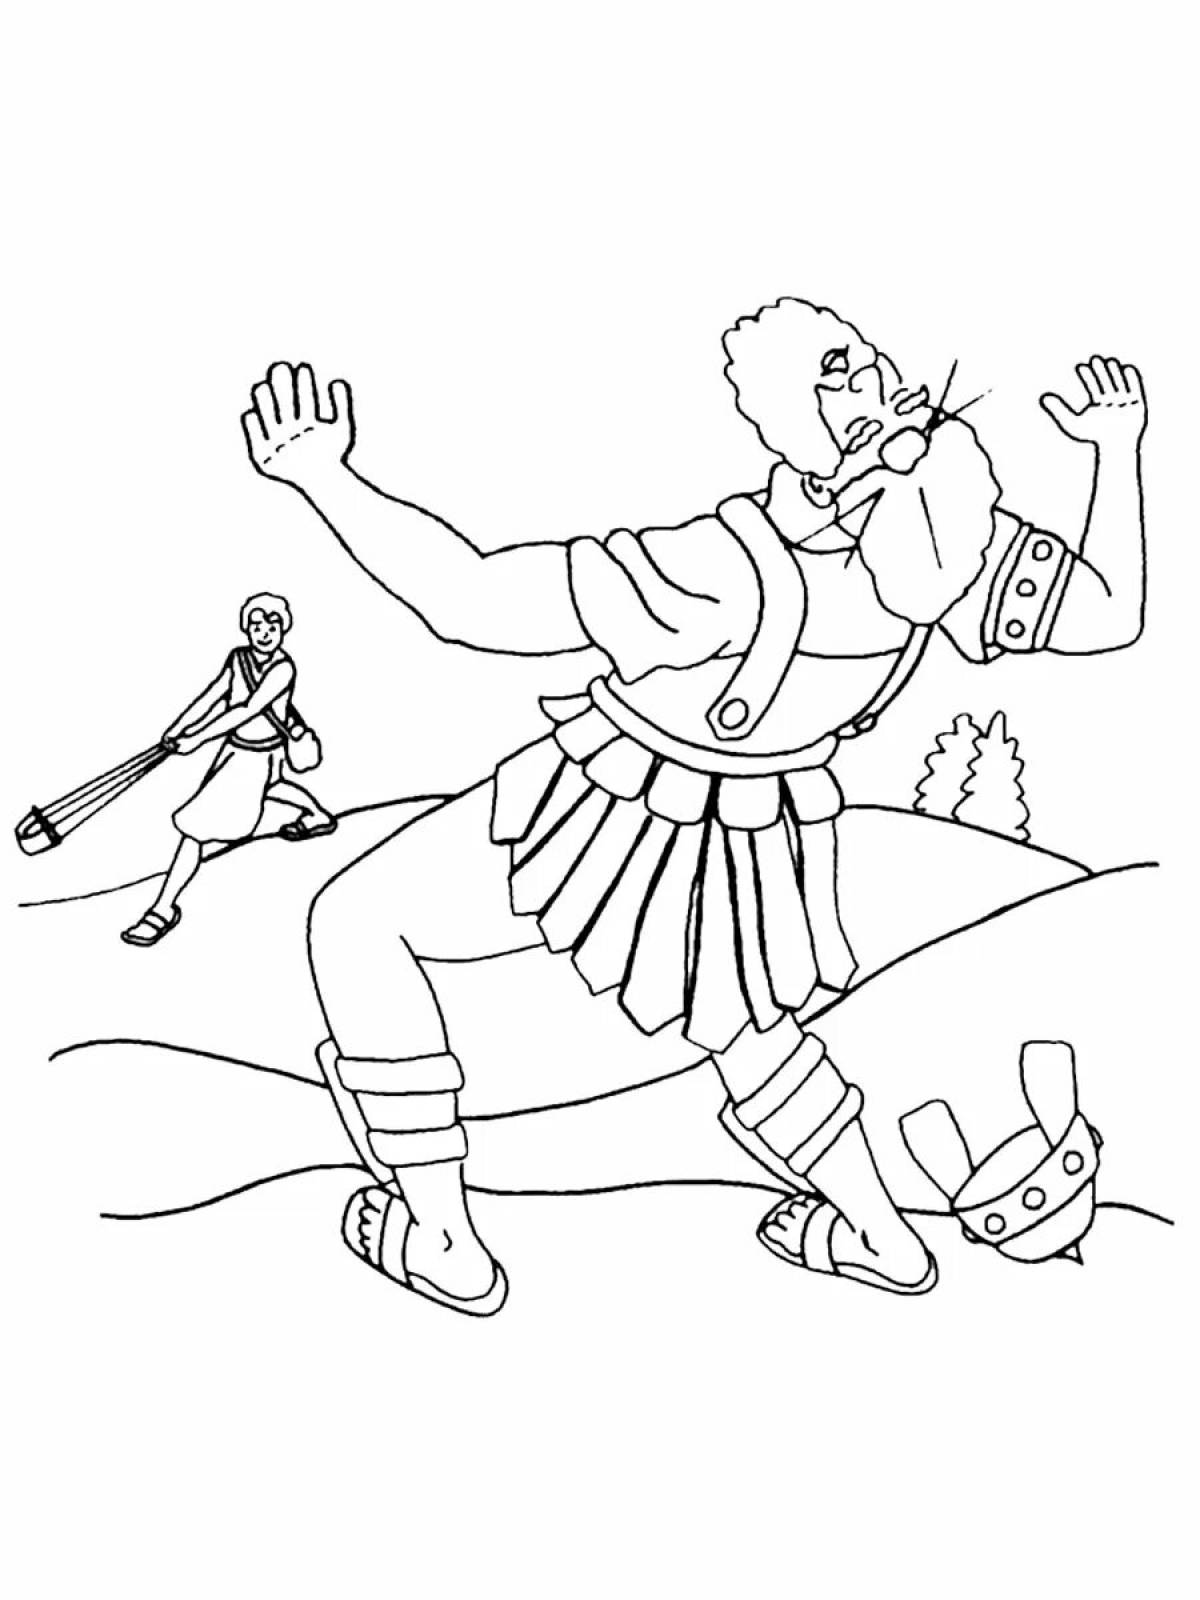 Jolly david and goliath coloring book